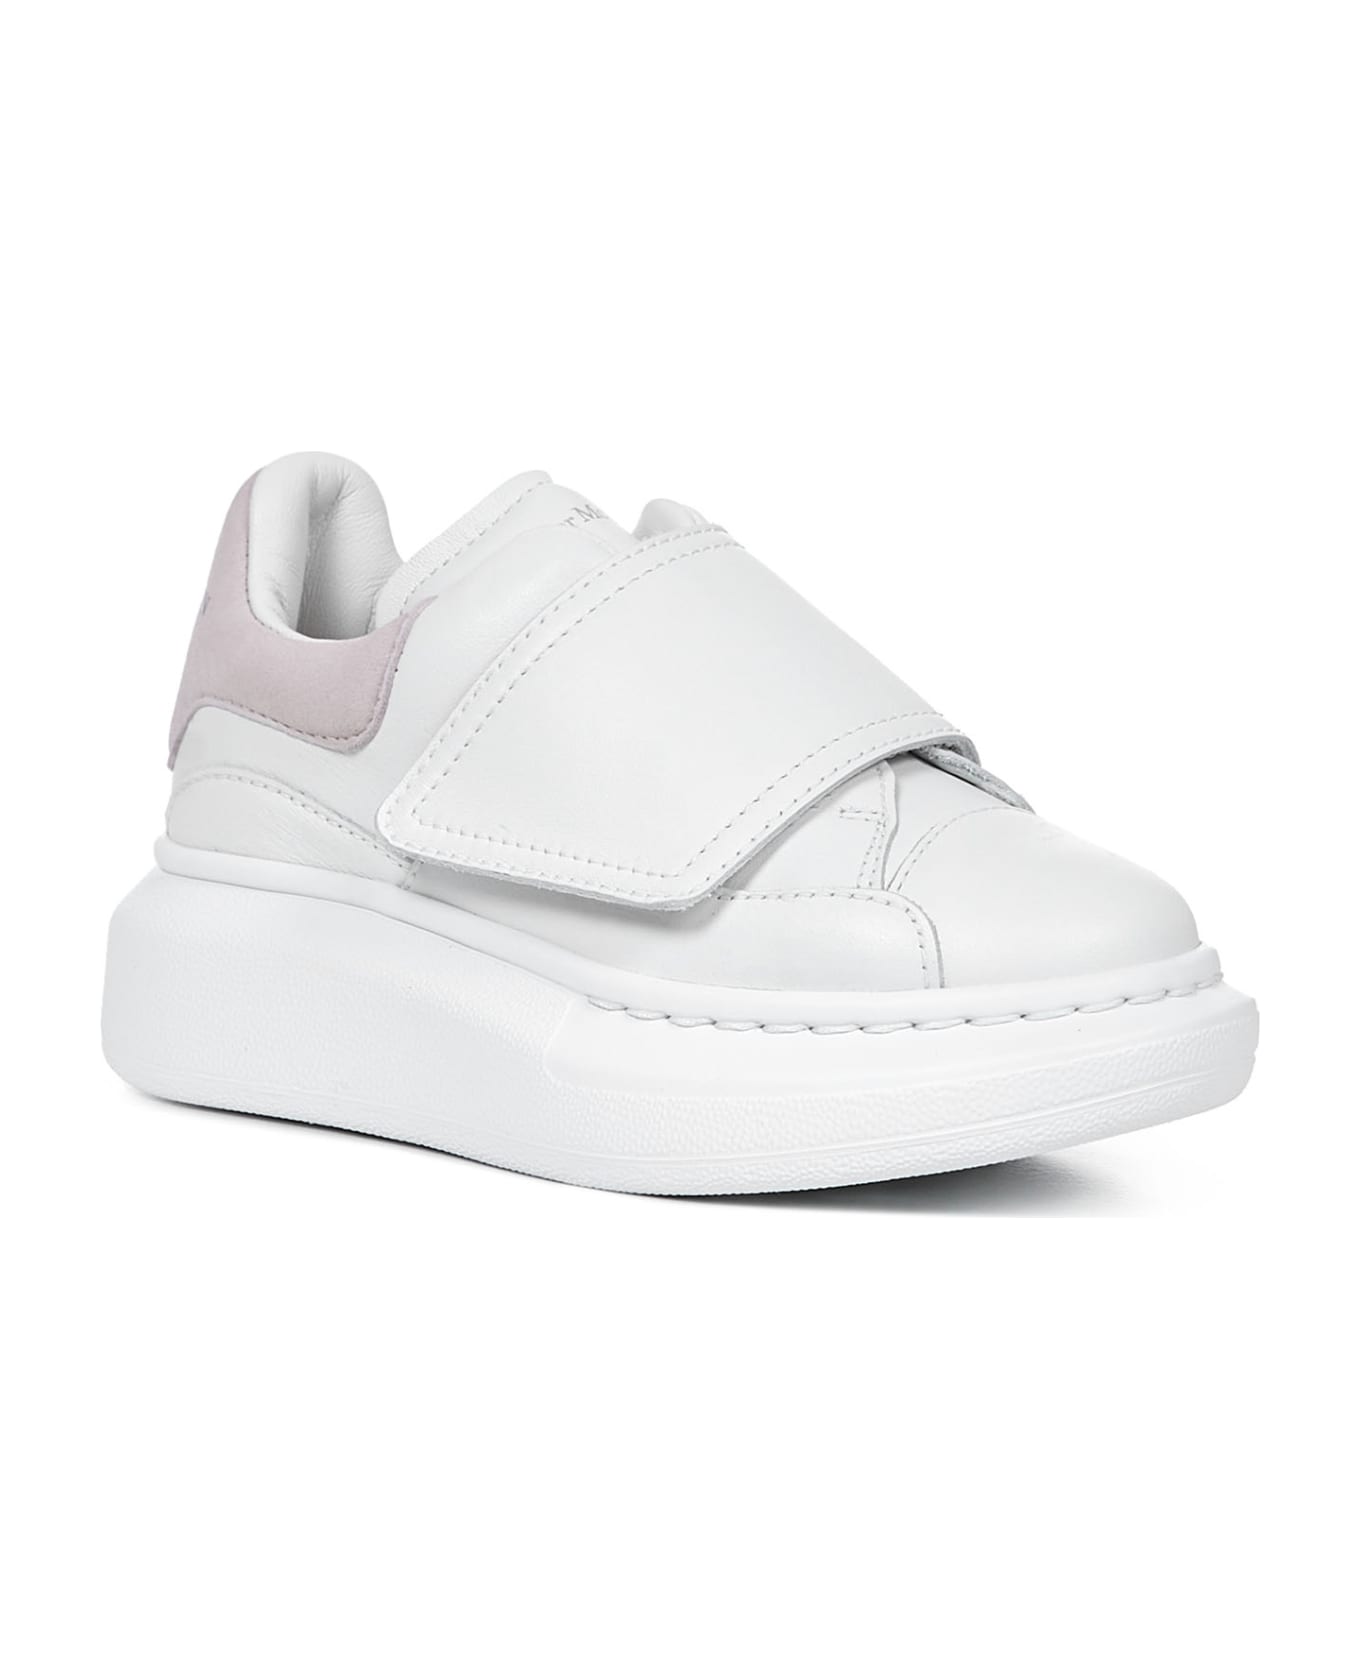 Alexander McQueen Molly Sneakers - White/pink